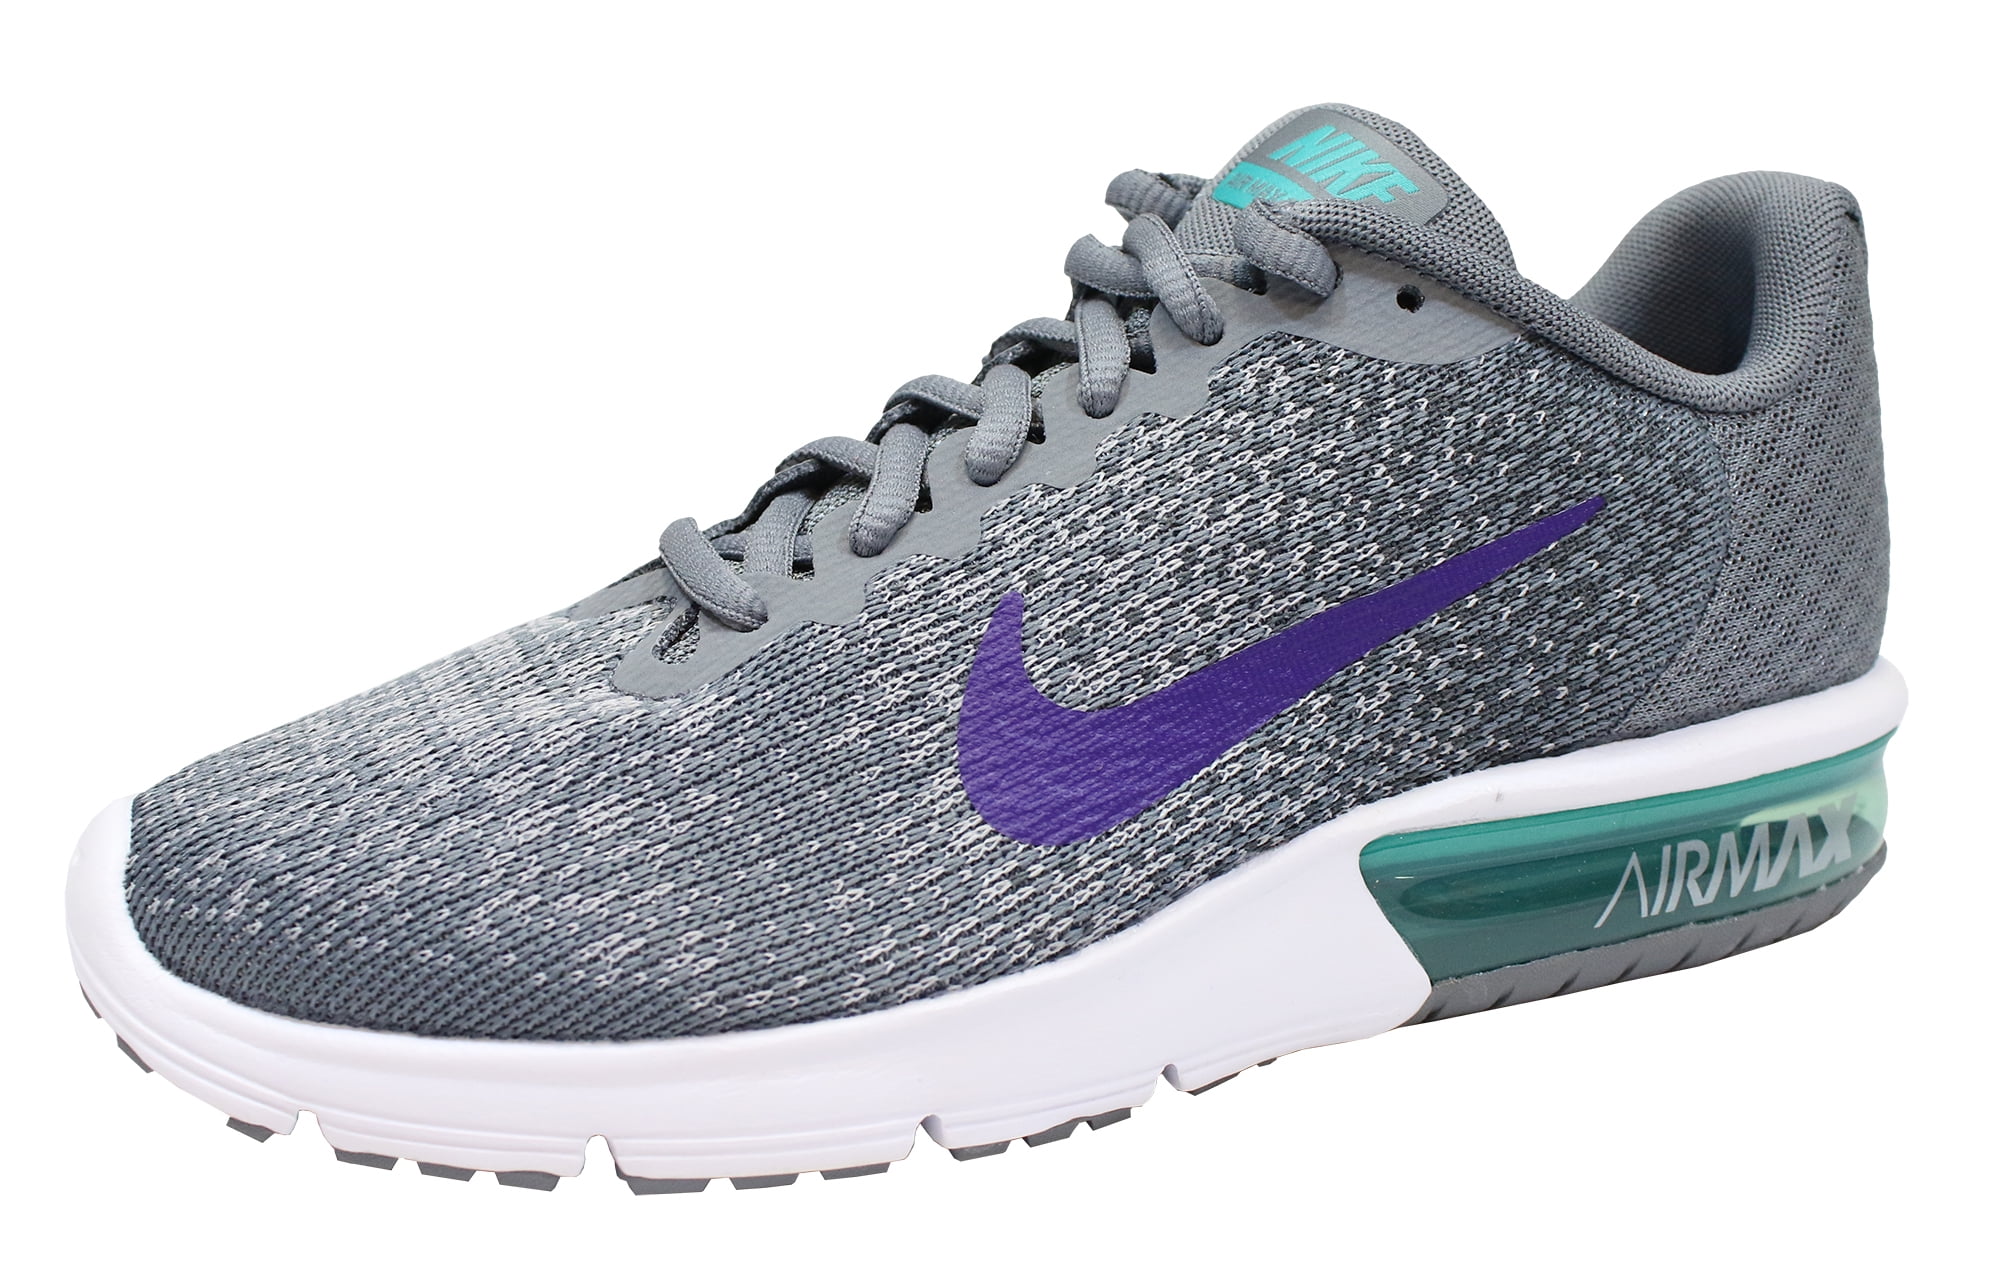 nike performance air max sequent 2